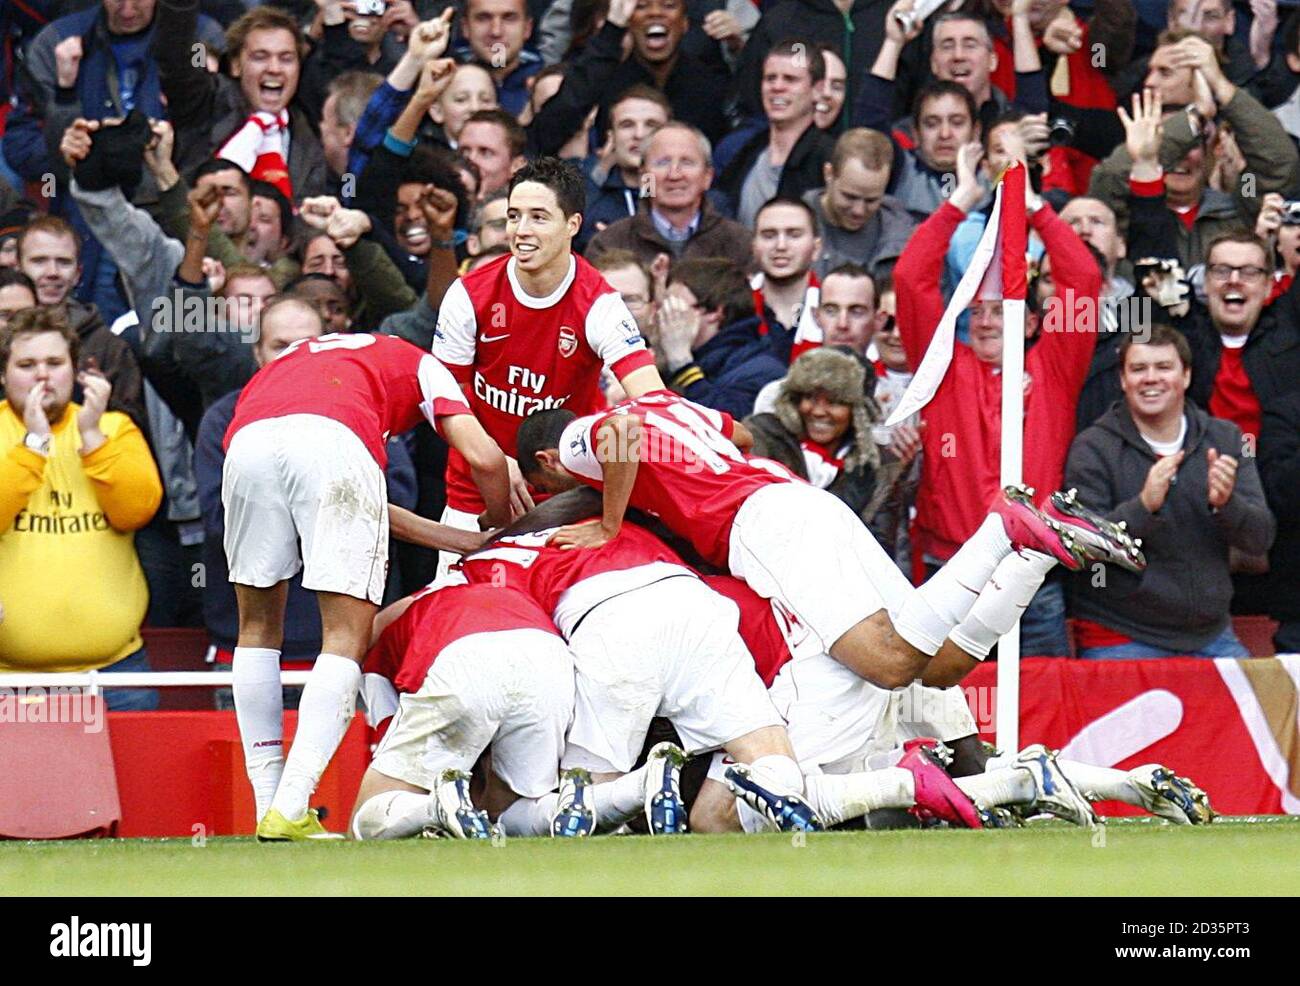 Arsenal players celebrate after their team mate Alex Song scored the only goal of the game. Stock Photo